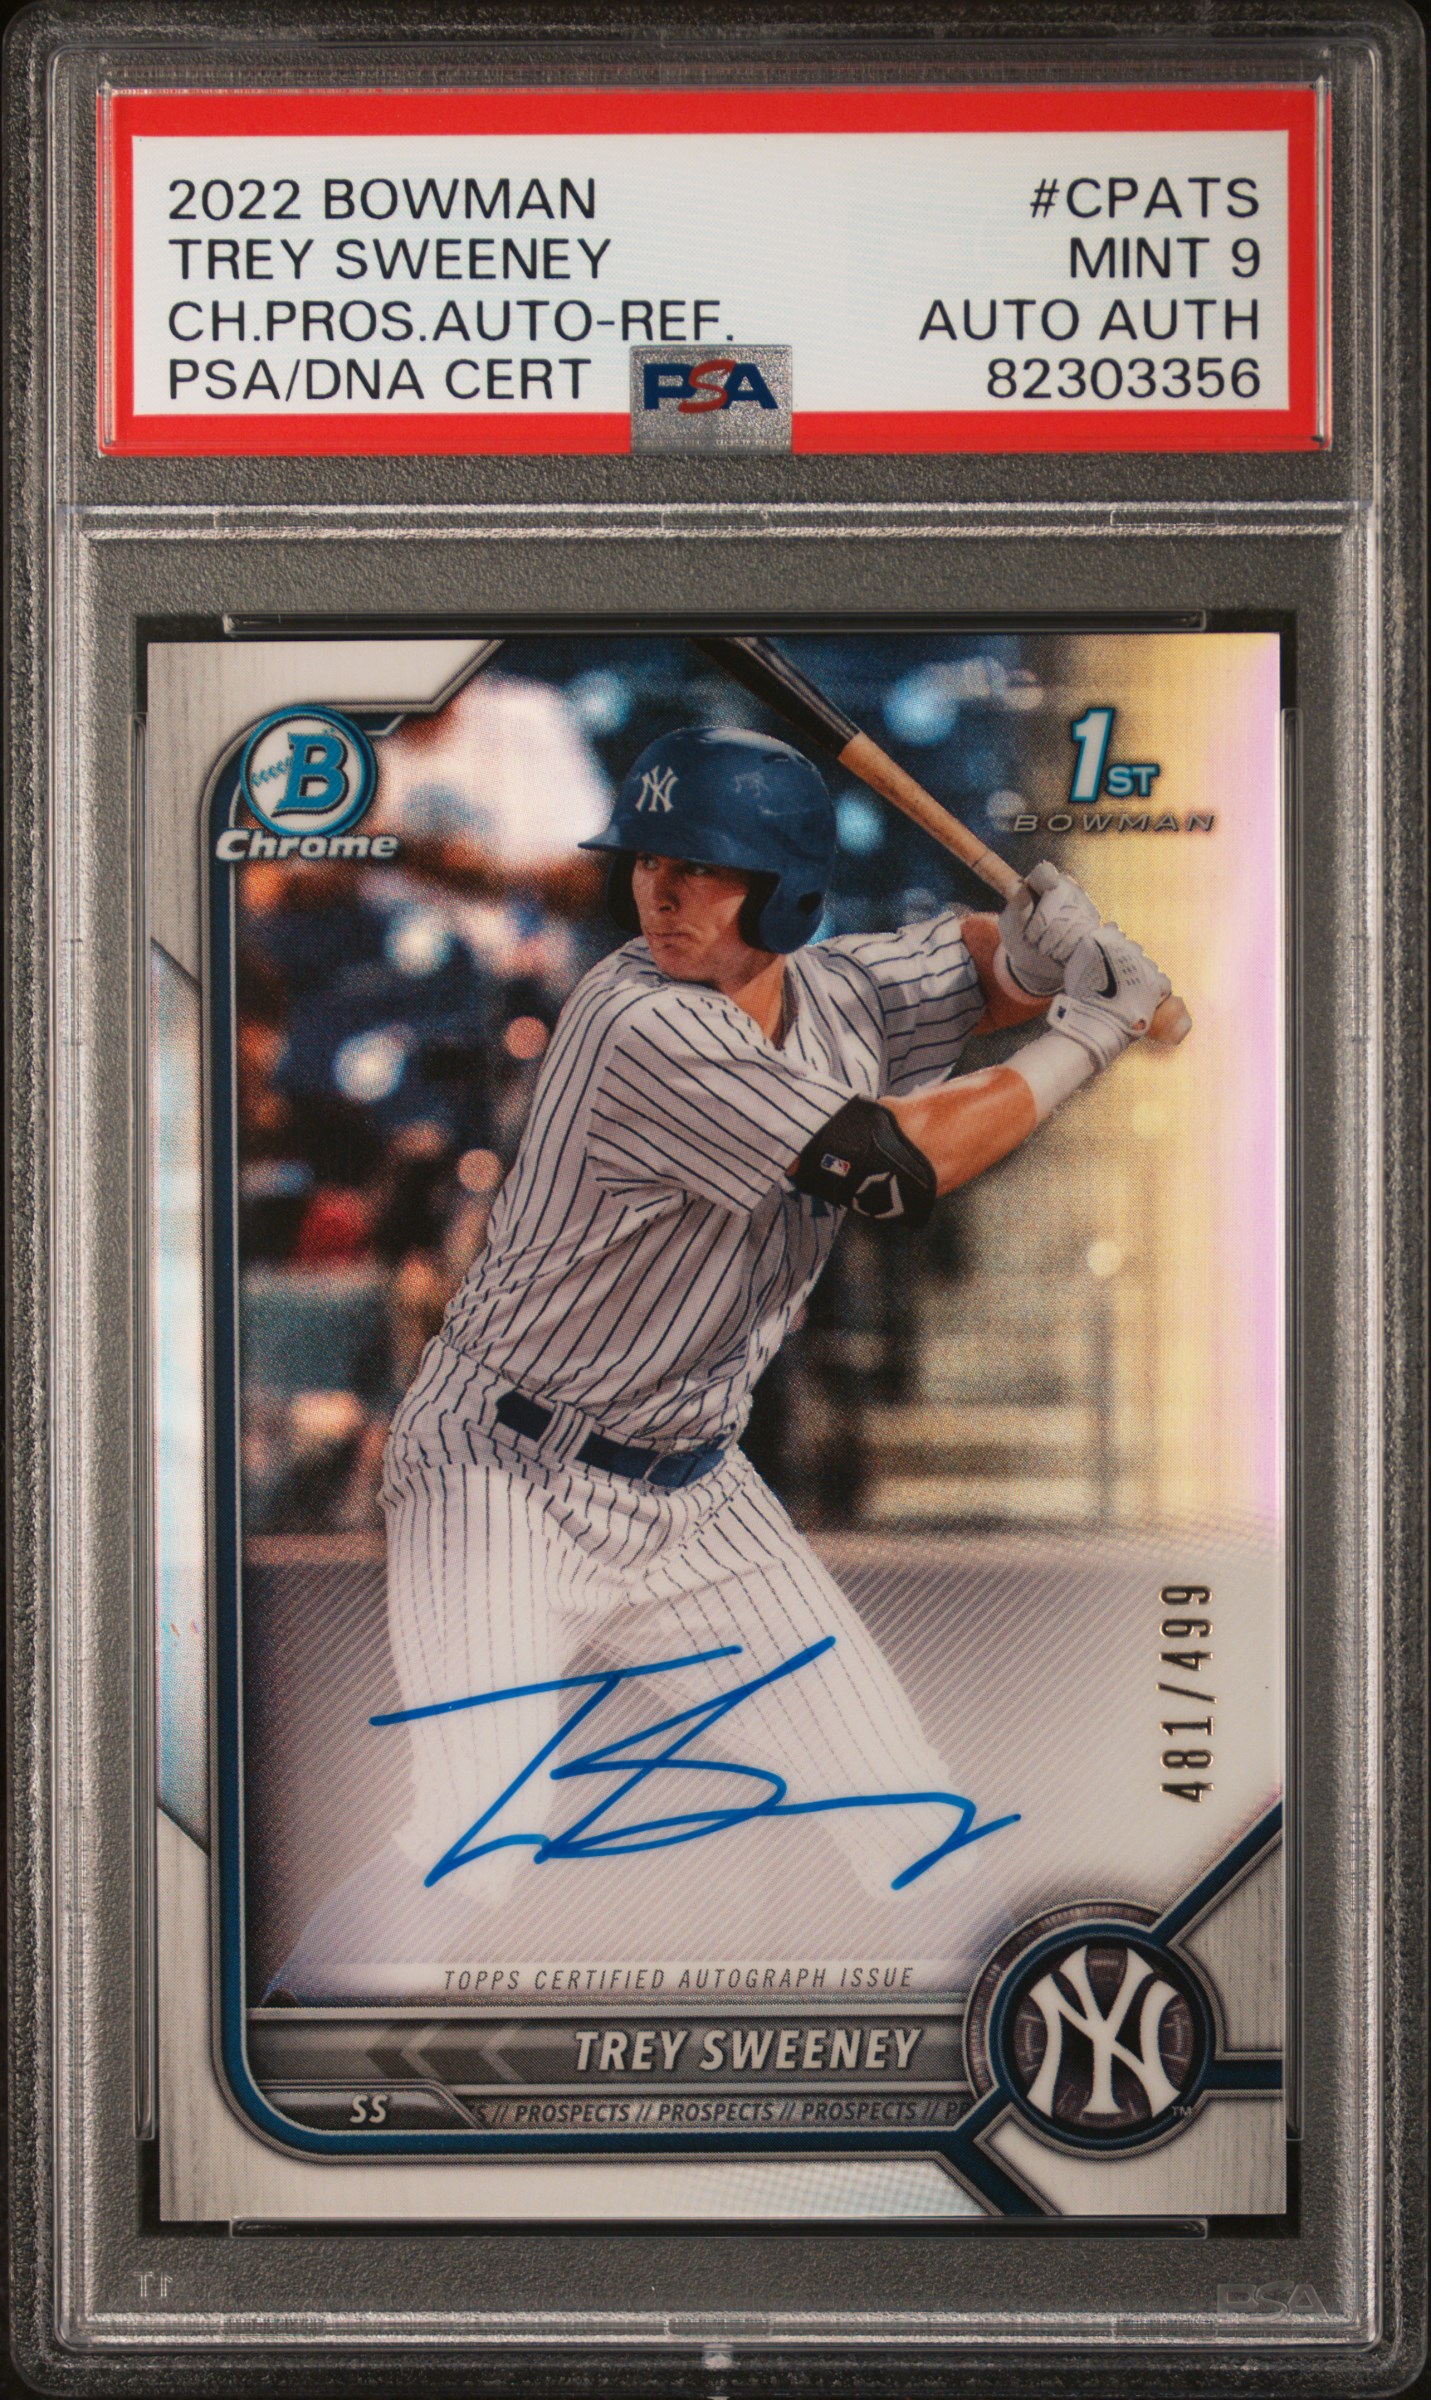 2022 Bowman Chrome Prospect Autographs Refractor #CPA-TS Trey Sweeney Signed Rookie Card (#481/499) – PSA MINT 9